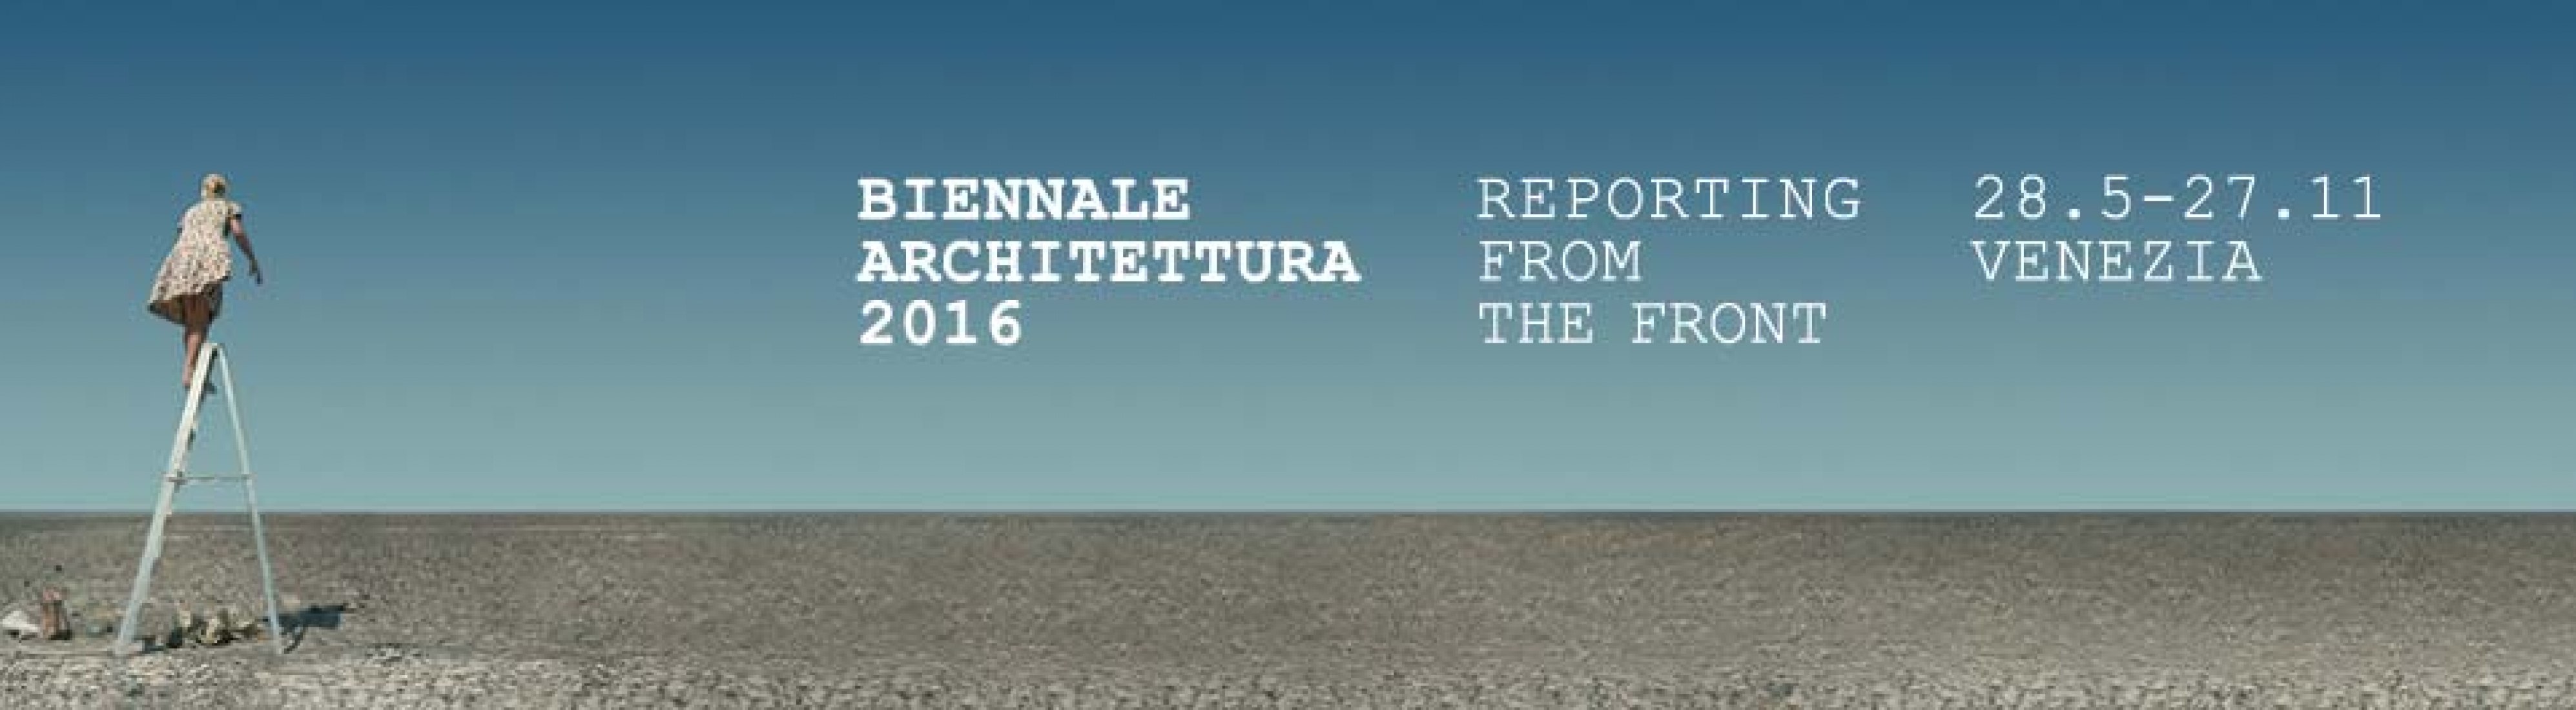 Venice Biennale Orgy of Celebrities. | The Strength of Architecture ...